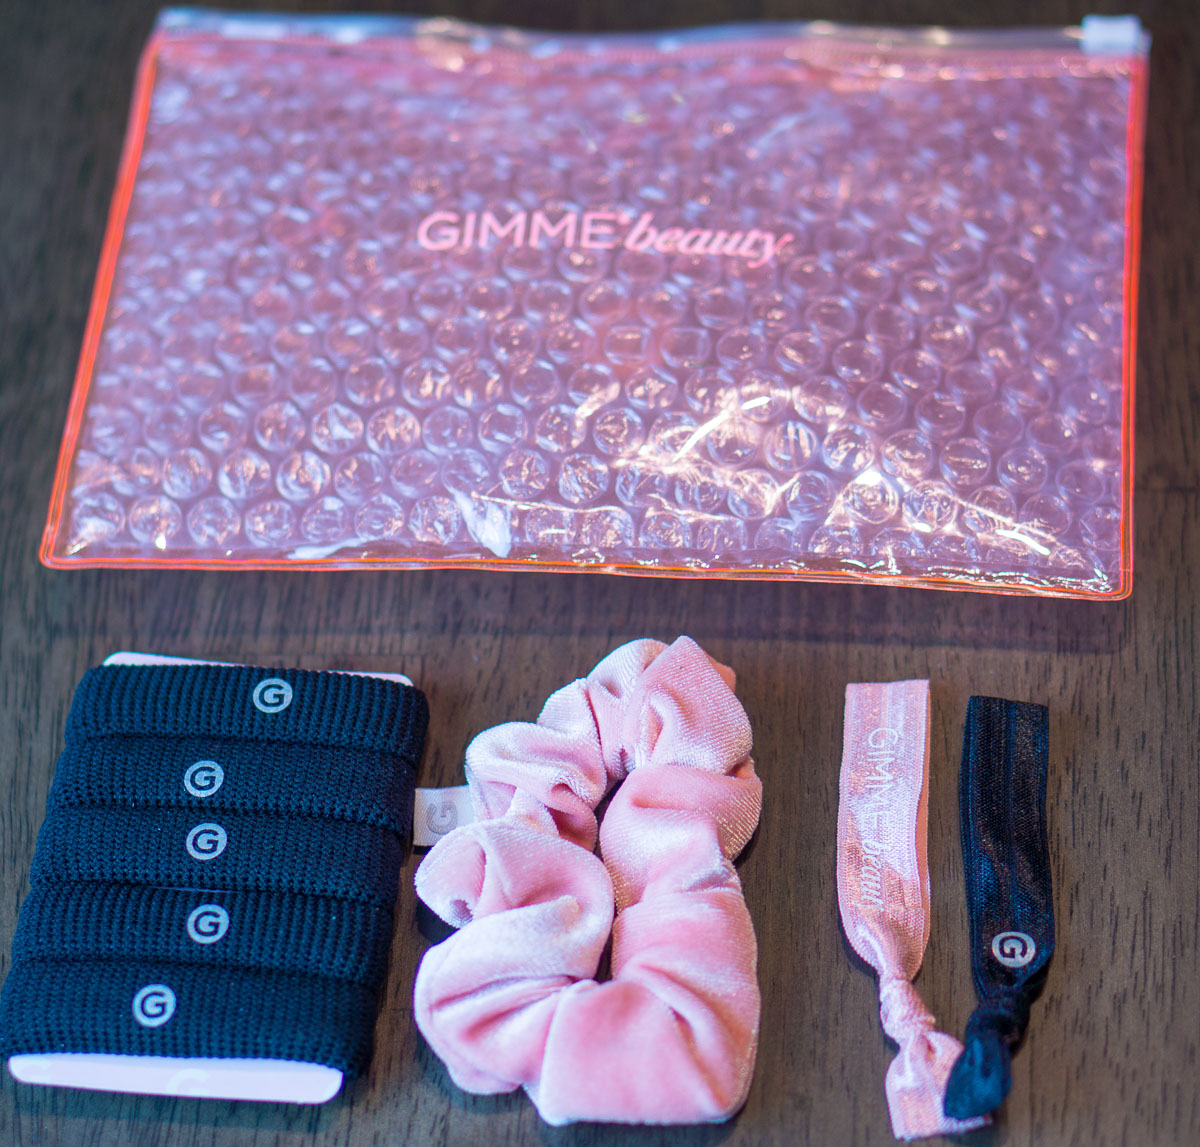 Best Hair Ties | GIMME Beauty Review for machine washable hair elastics that cause no breakage, dents or headaches! Discount code for best hair ties, woman hair elastics, scrunchies, best hair ties for thick hair, no snags, wash like new, M. Gemi Cerchio sneakers, J. Crew v-neck tees, Nordstrom faux leather jacket, casual outfit petite fashion & style blog